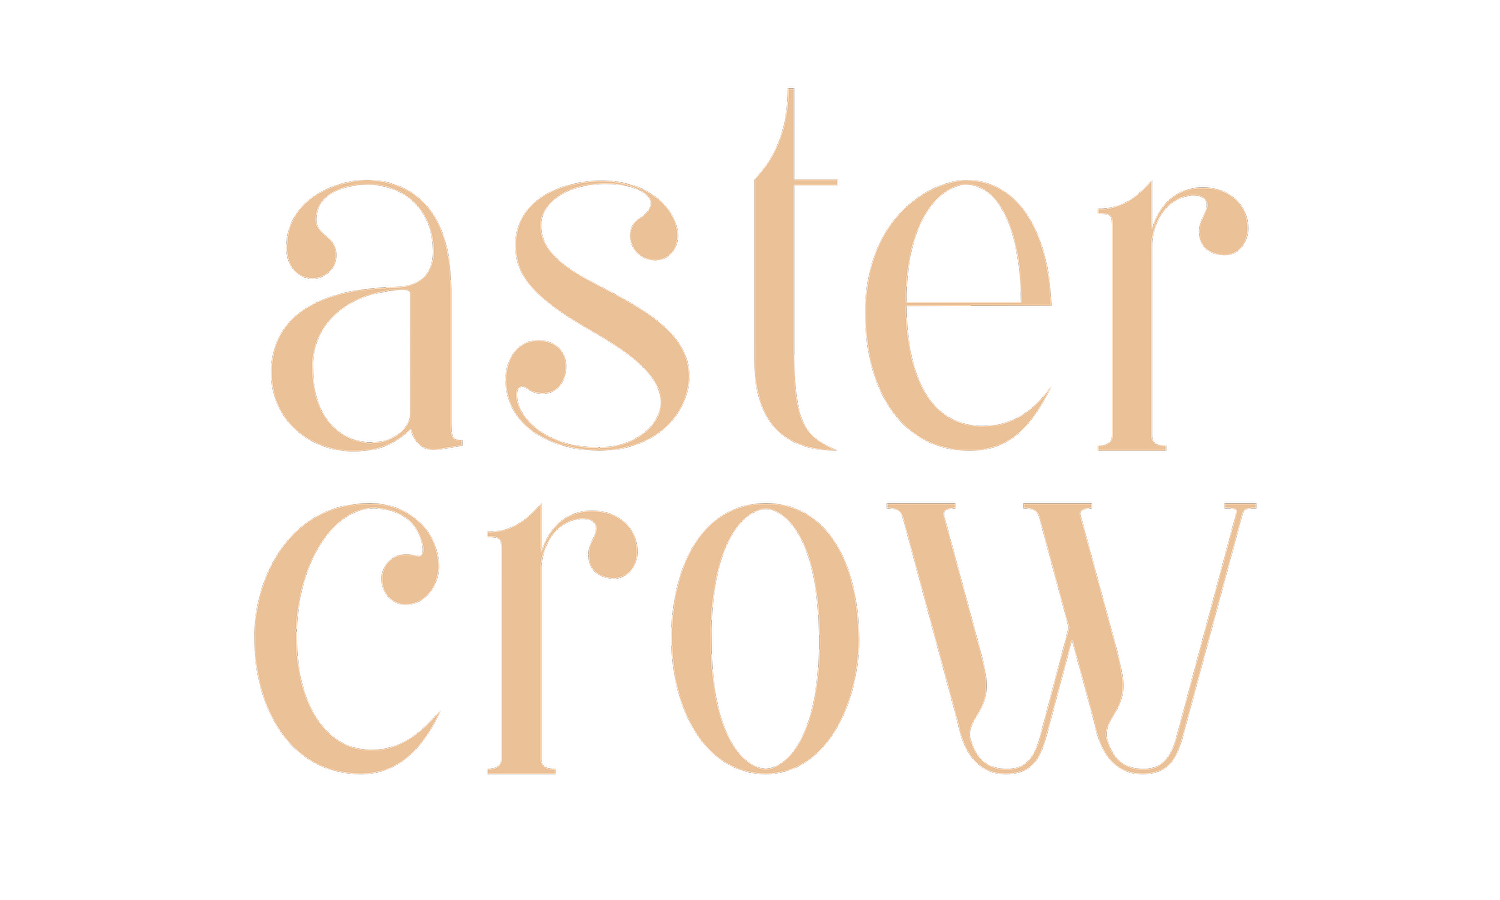 aster crow